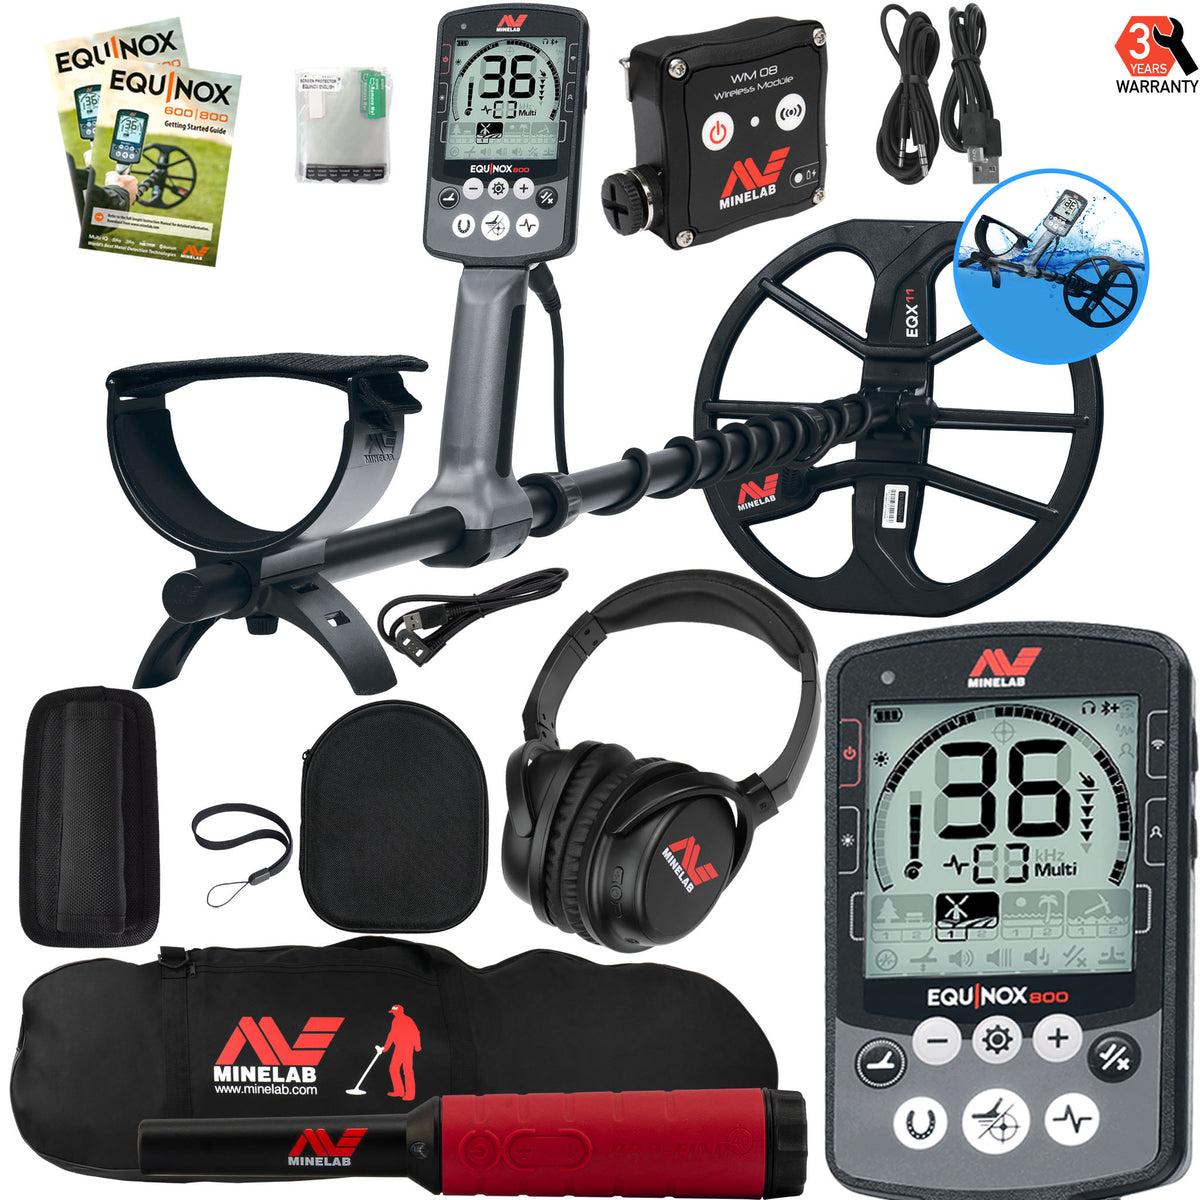 Minelab EQUINOX 800 Waterproof Metal Detector with Pro-Find 40 and Car ...